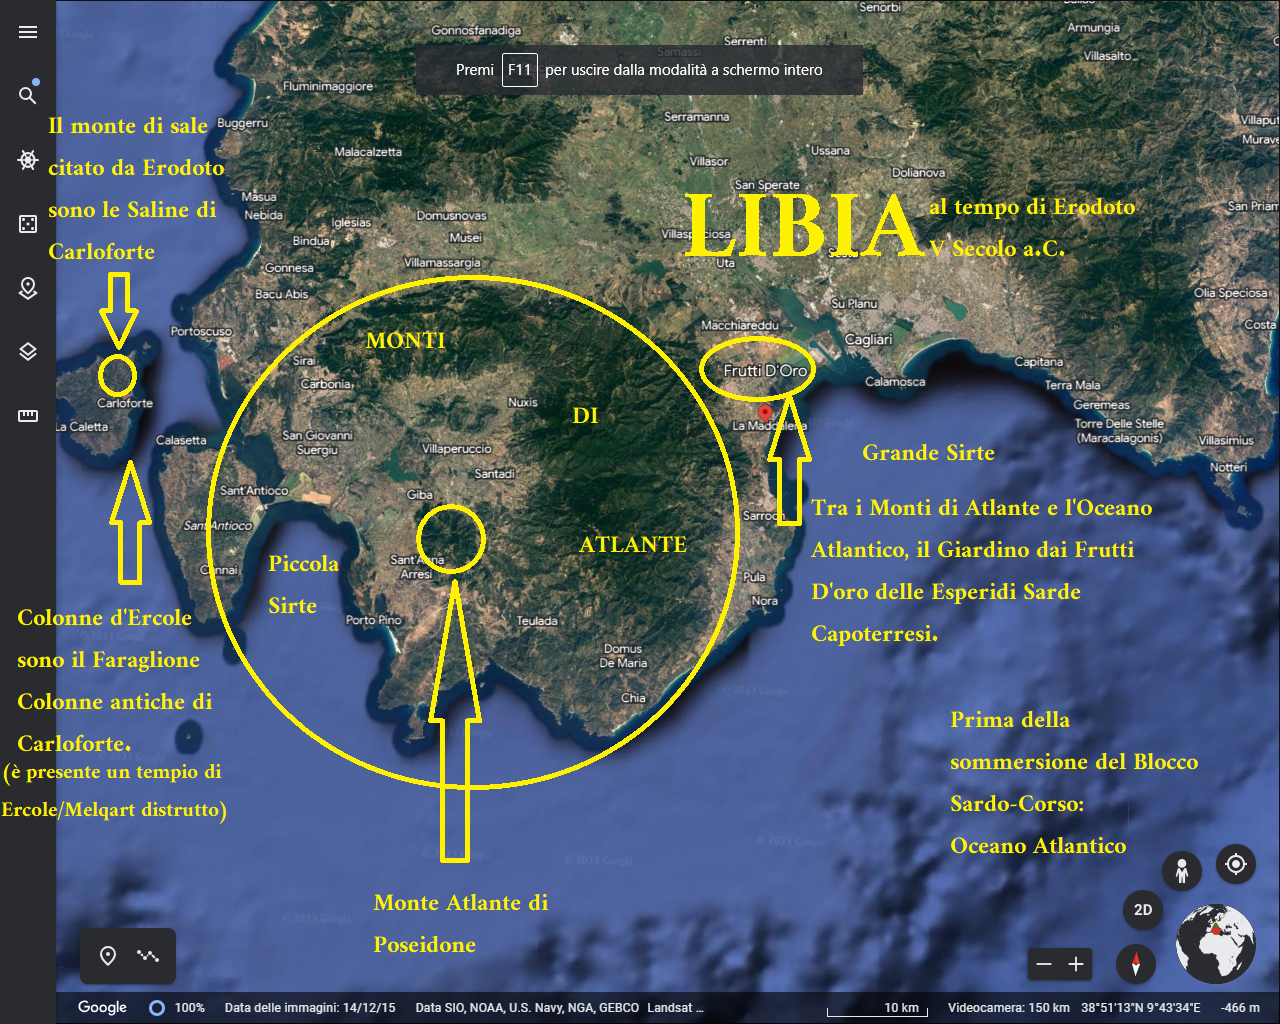 By Libya Herodotus meant South Sardinia and not African Libya